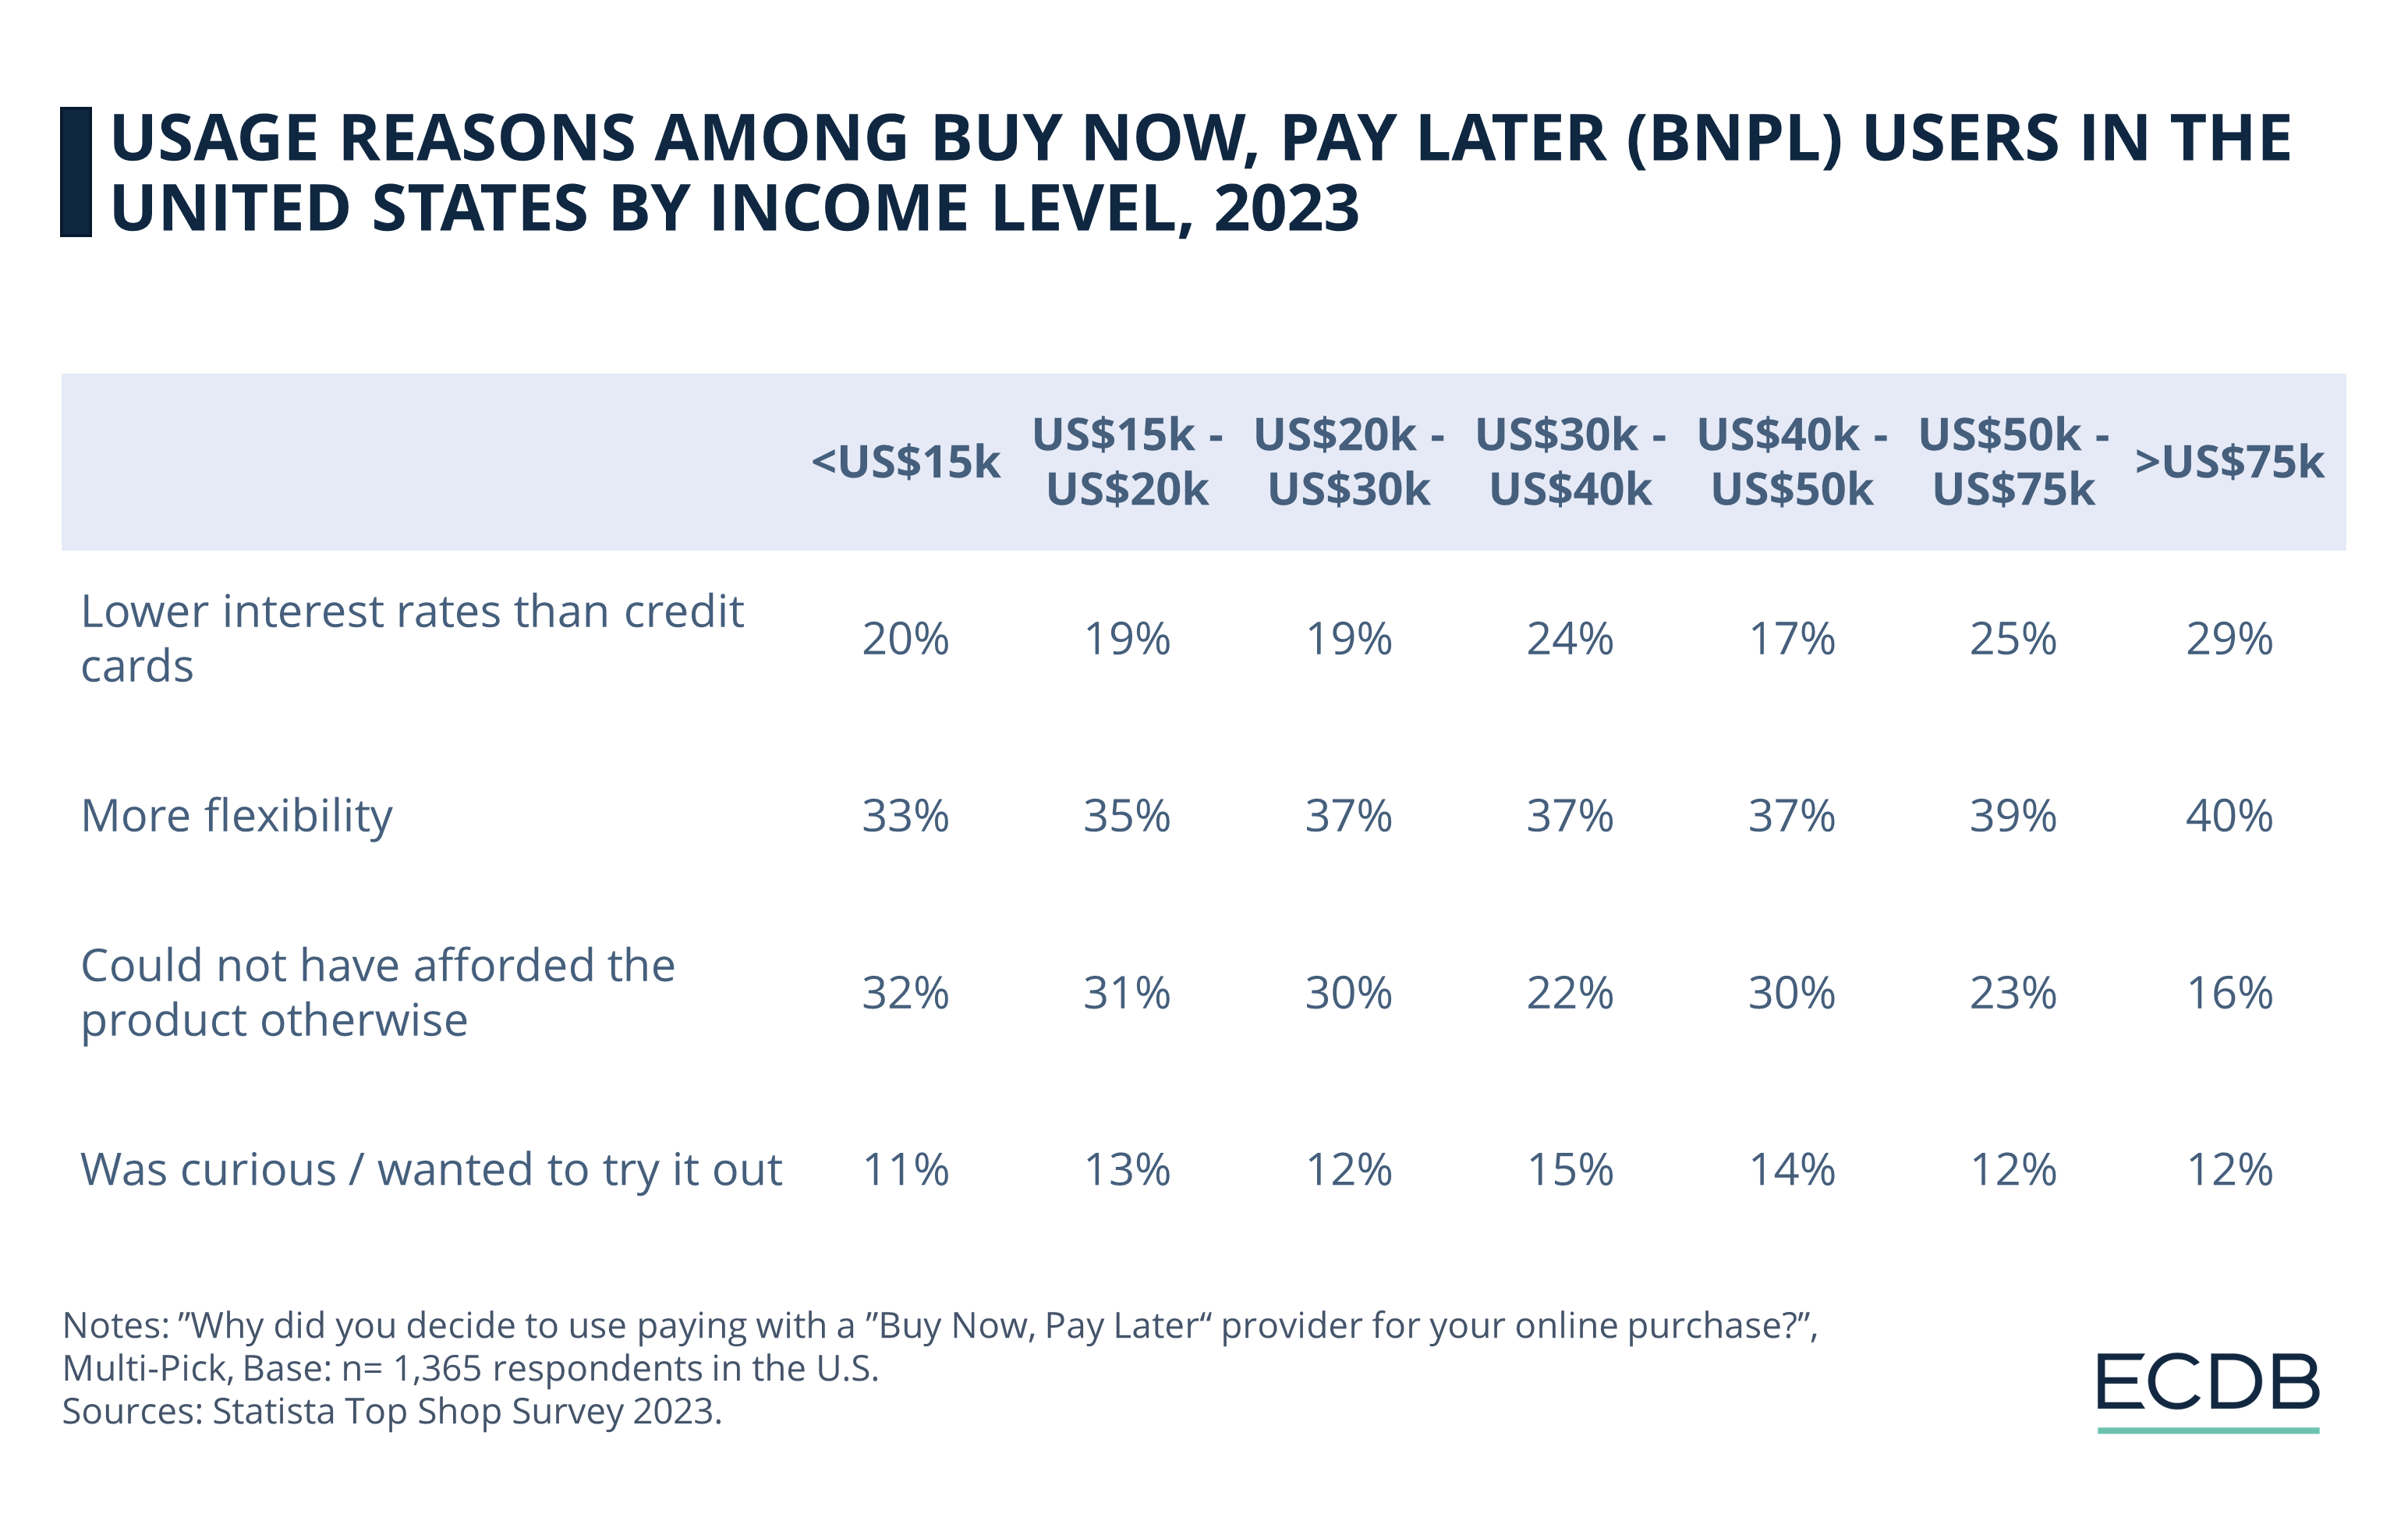 Usage Reasons Among Buy Now, Pay Later (BNPL) Users in the United States by Income Level, 2023